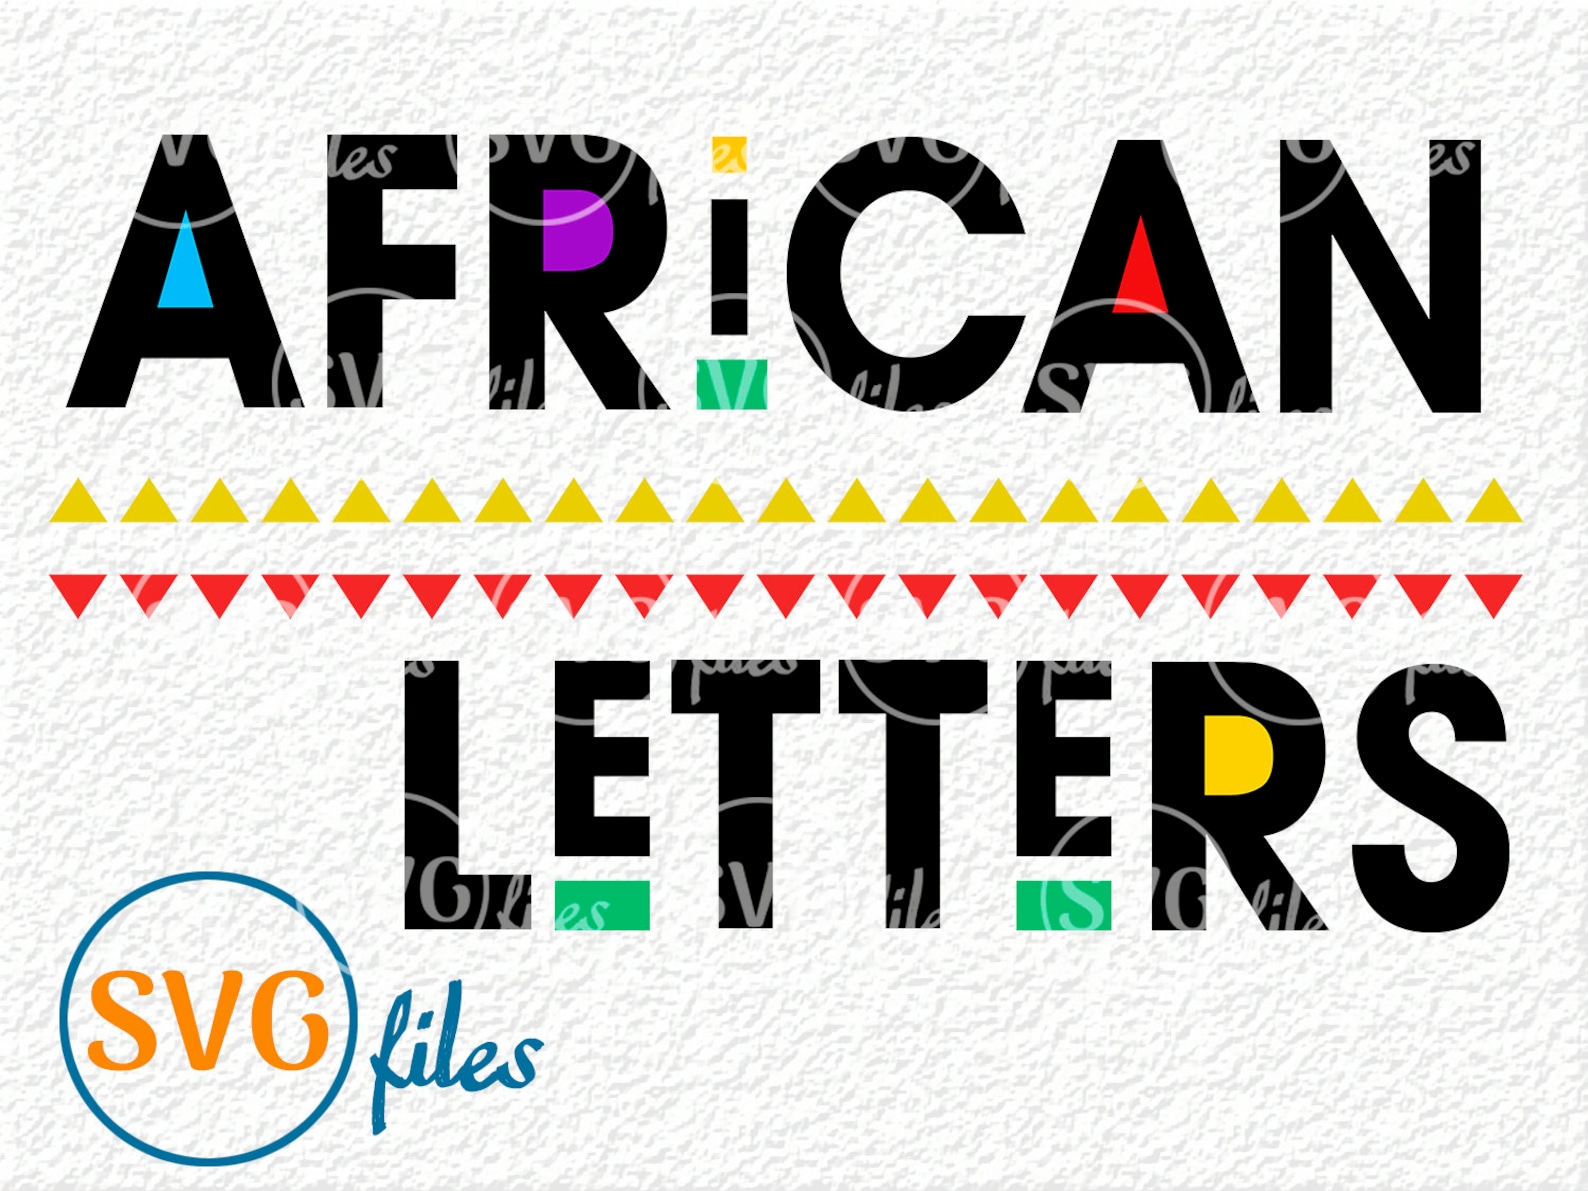 African Letters Svg African Letters Cut File African Letters Etsy